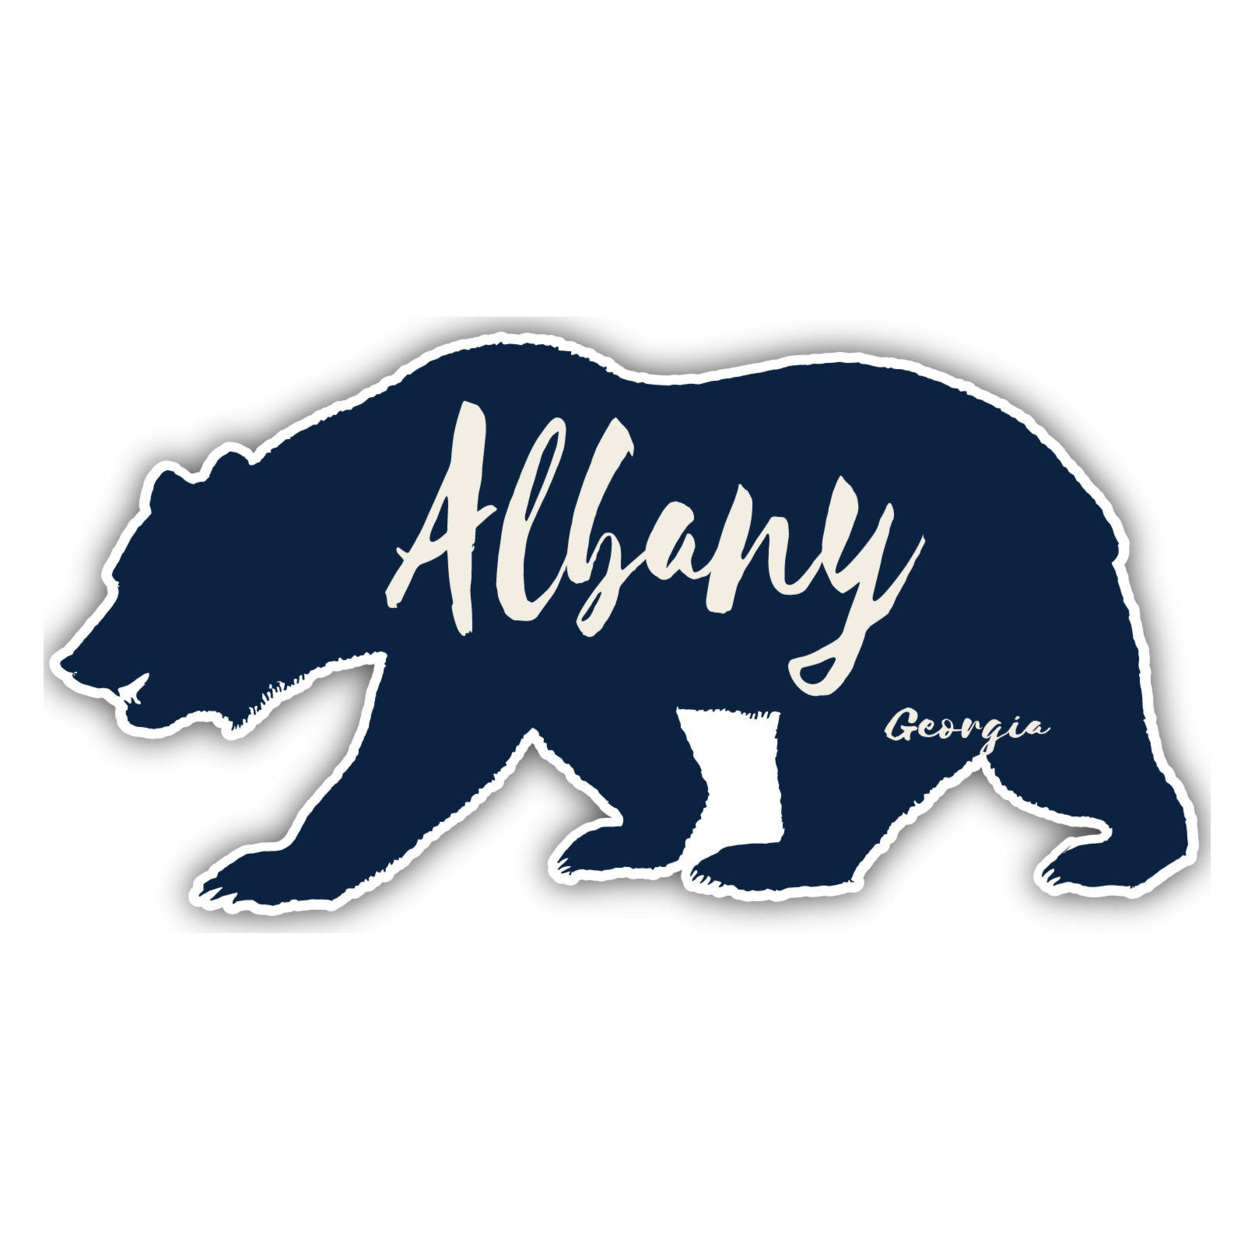 Albany Georgia Souvenir Decorative Stickers (Choose Theme And Size) - 4-Pack, 4-Inch, Bear